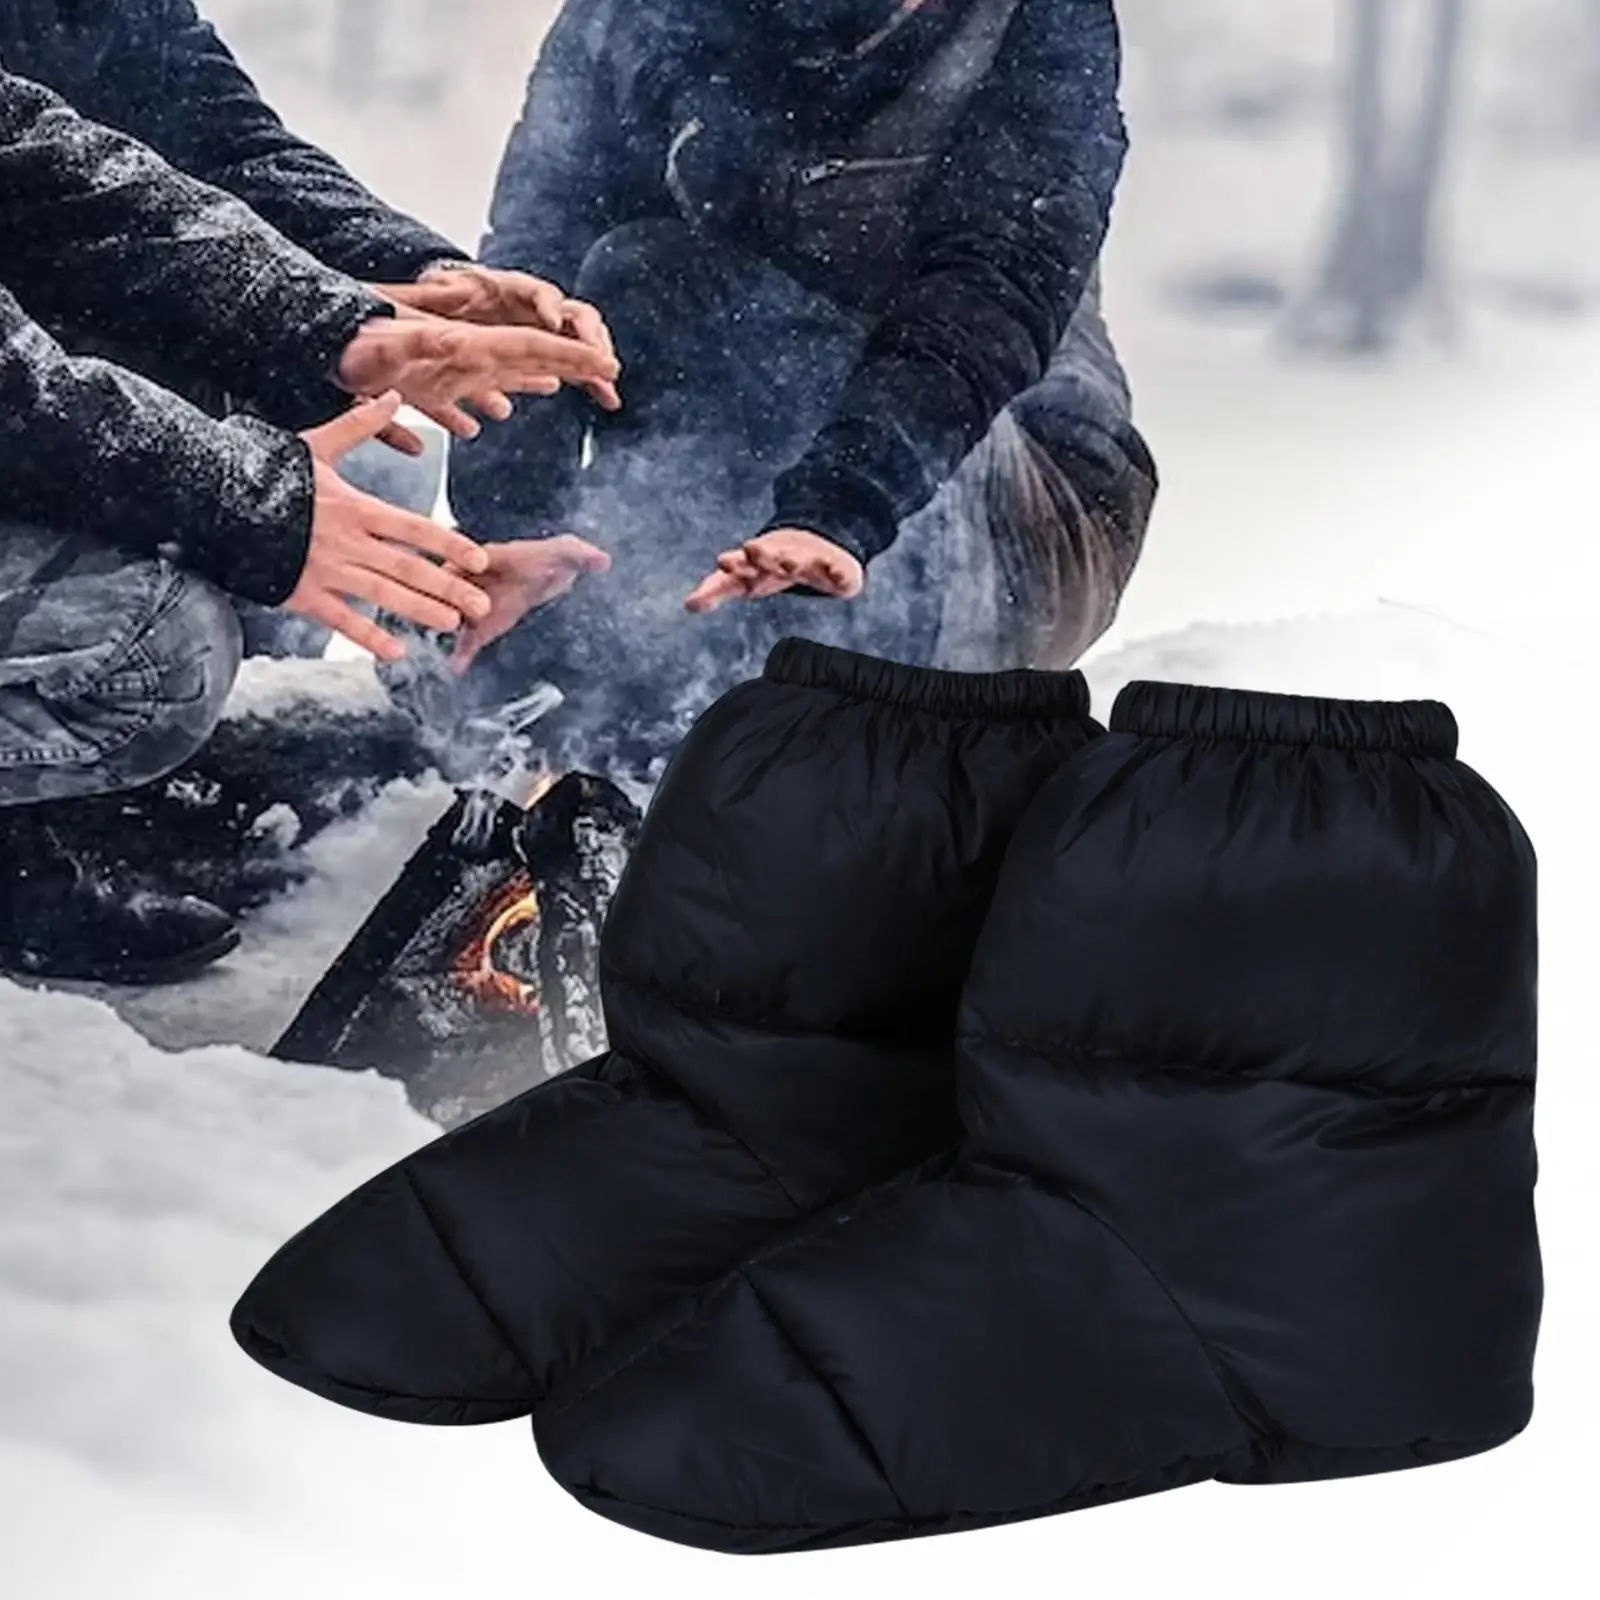 1 Pair Winter Down Slippers Bootie Shoes Soft Windproof Lightweight Snow Boots for Camping Skiing Outdoor Backpacking Gift